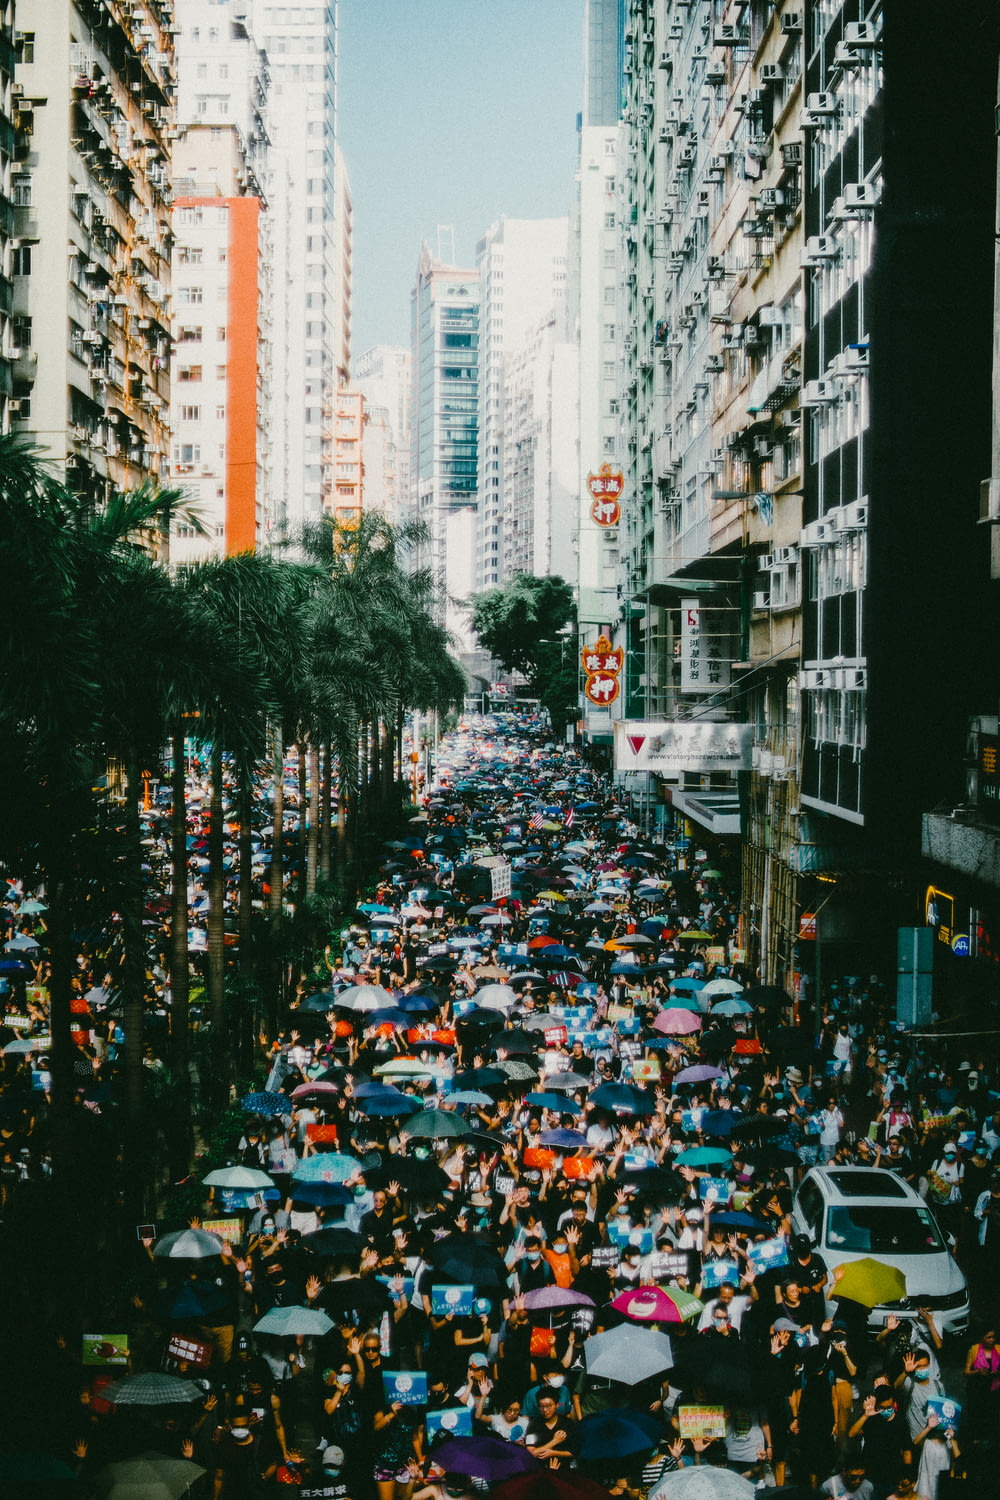 people in a city street during daytime